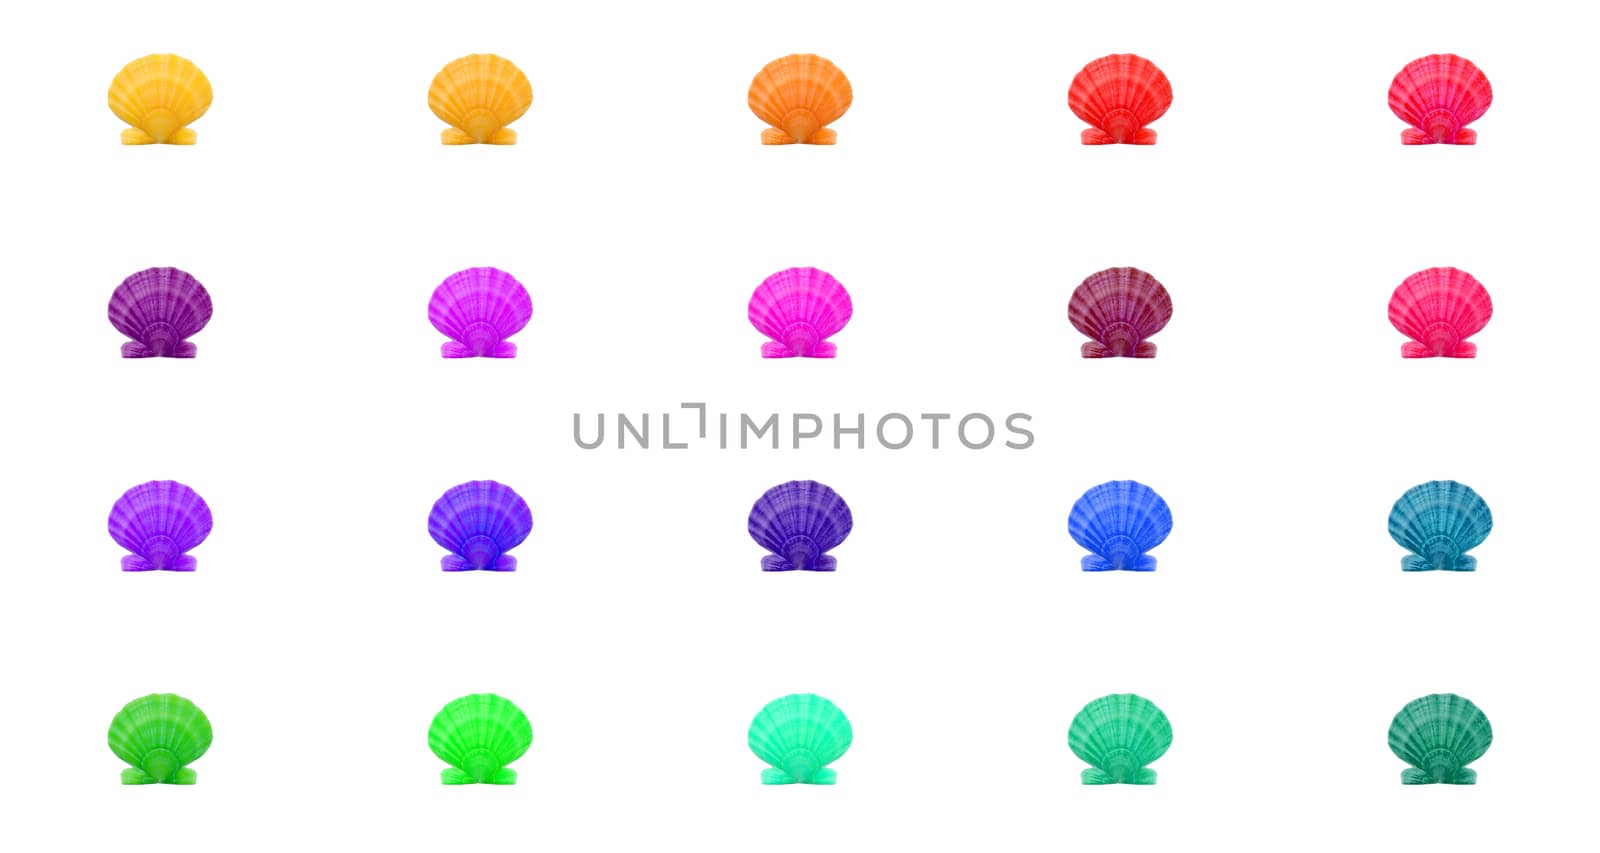 Bright colorful pattern background of multicolred shells in rainbow grid